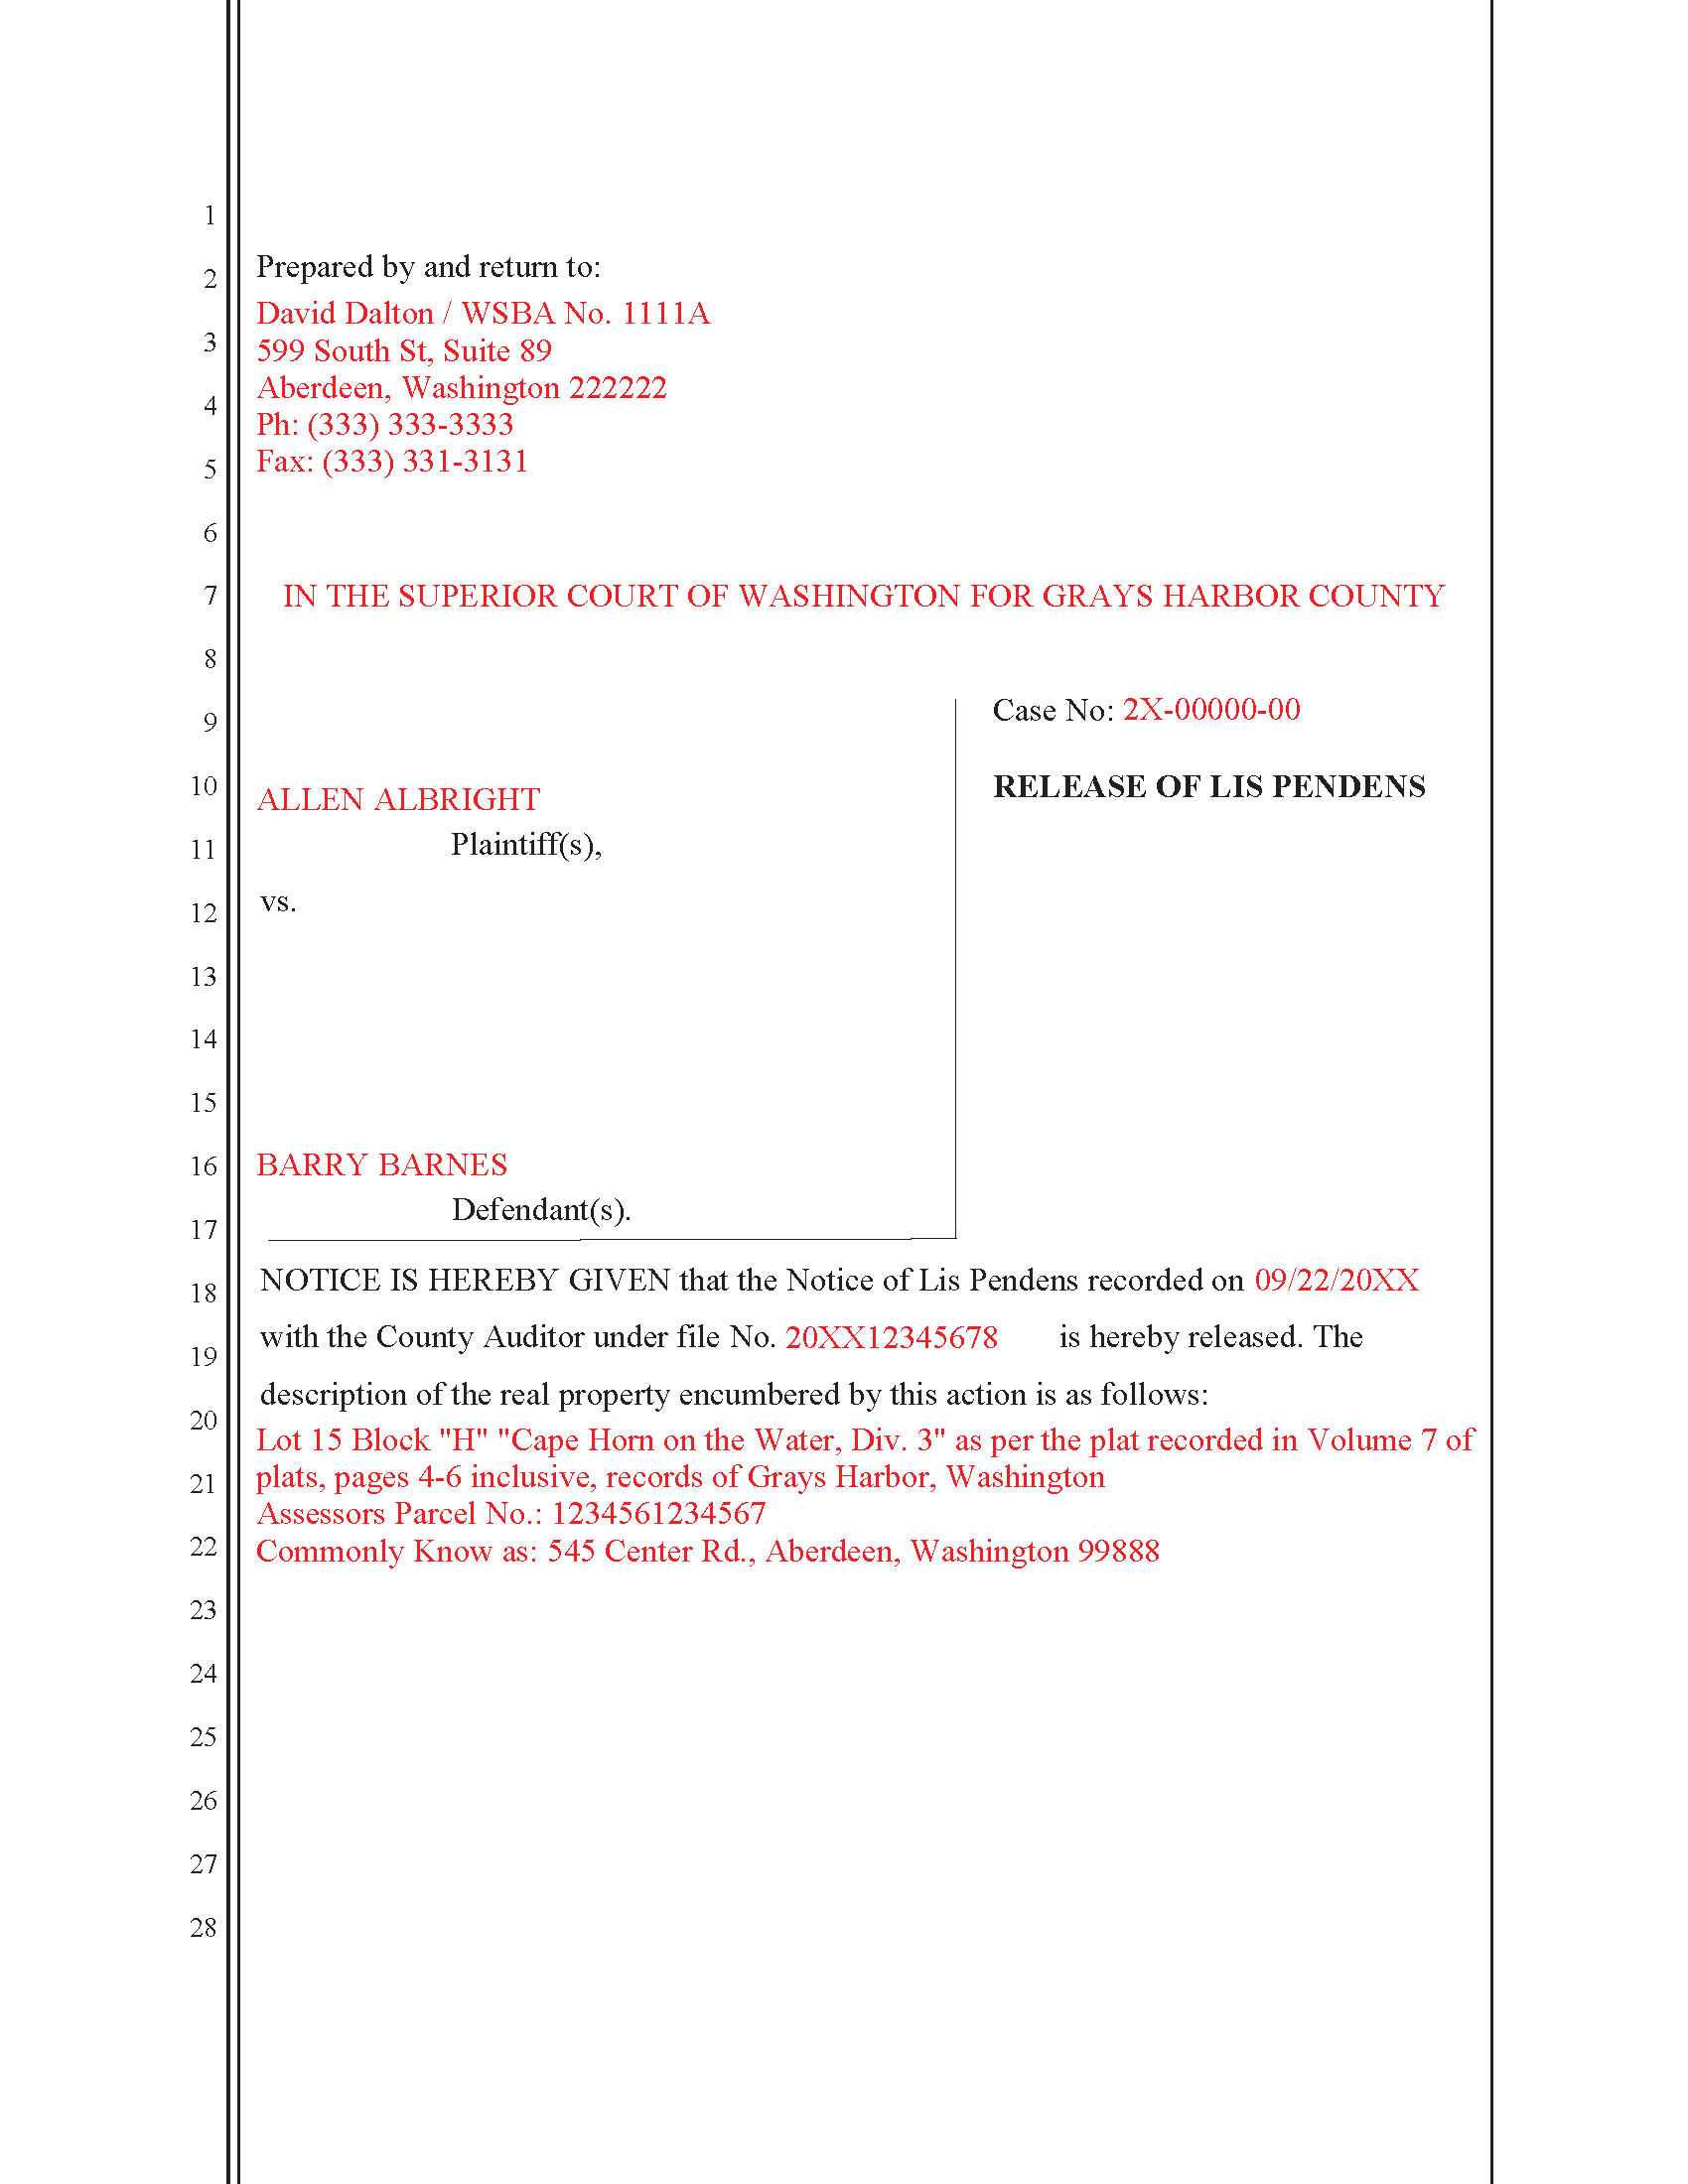 Completed Example of the Release of Lis Pendens Document